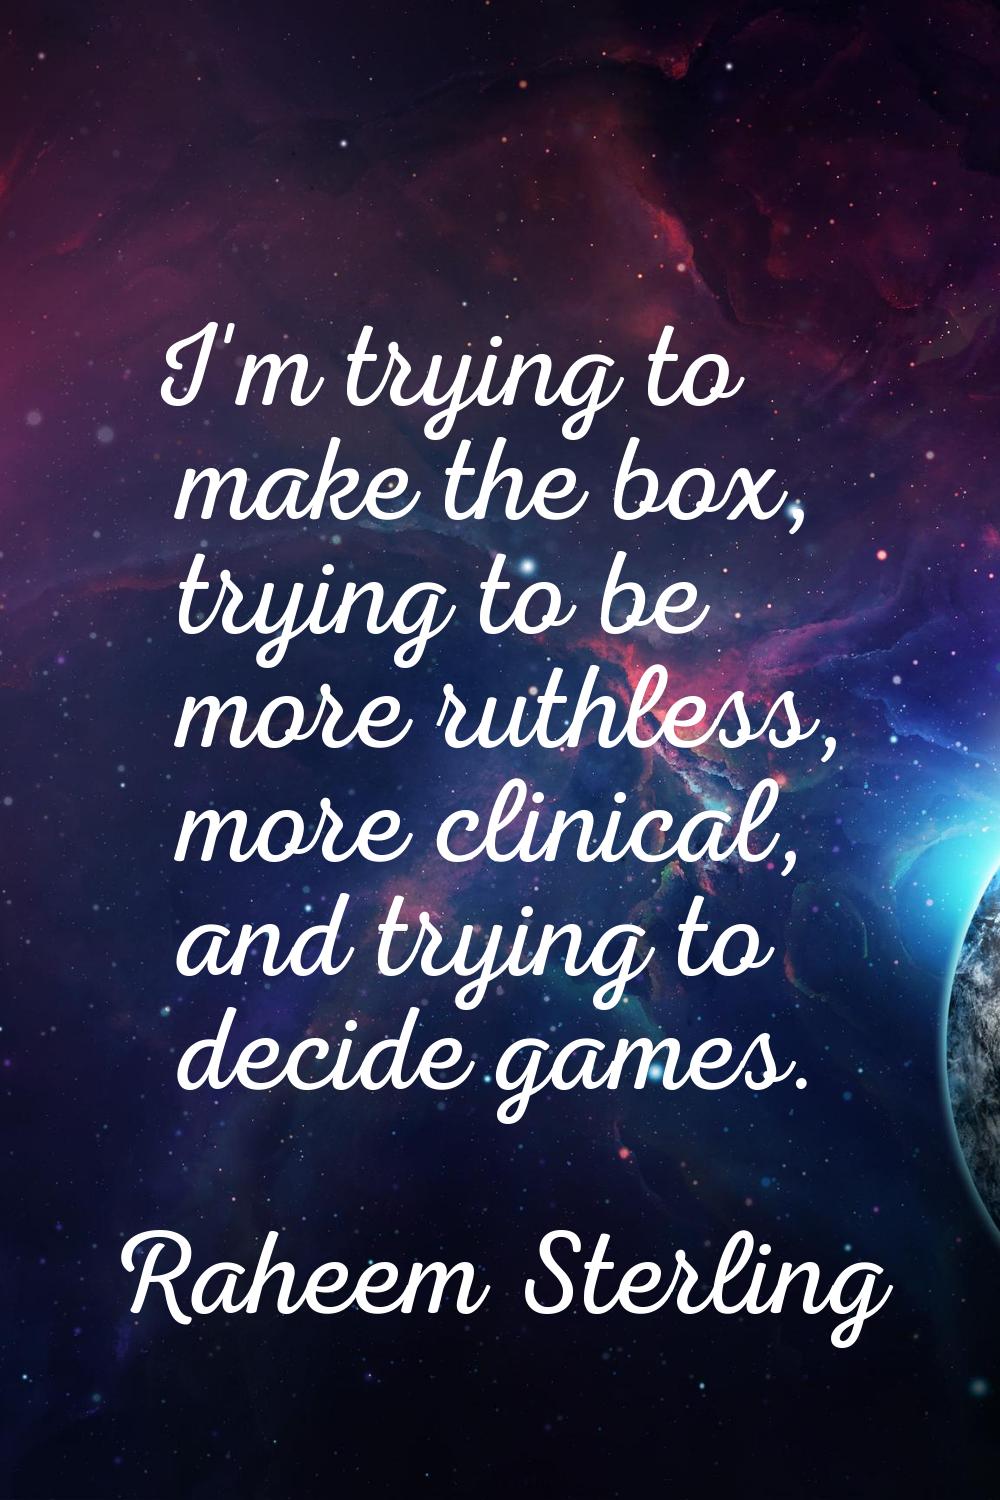 I'm trying to make the box, trying to be more ruthless, more clinical, and trying to decide games.